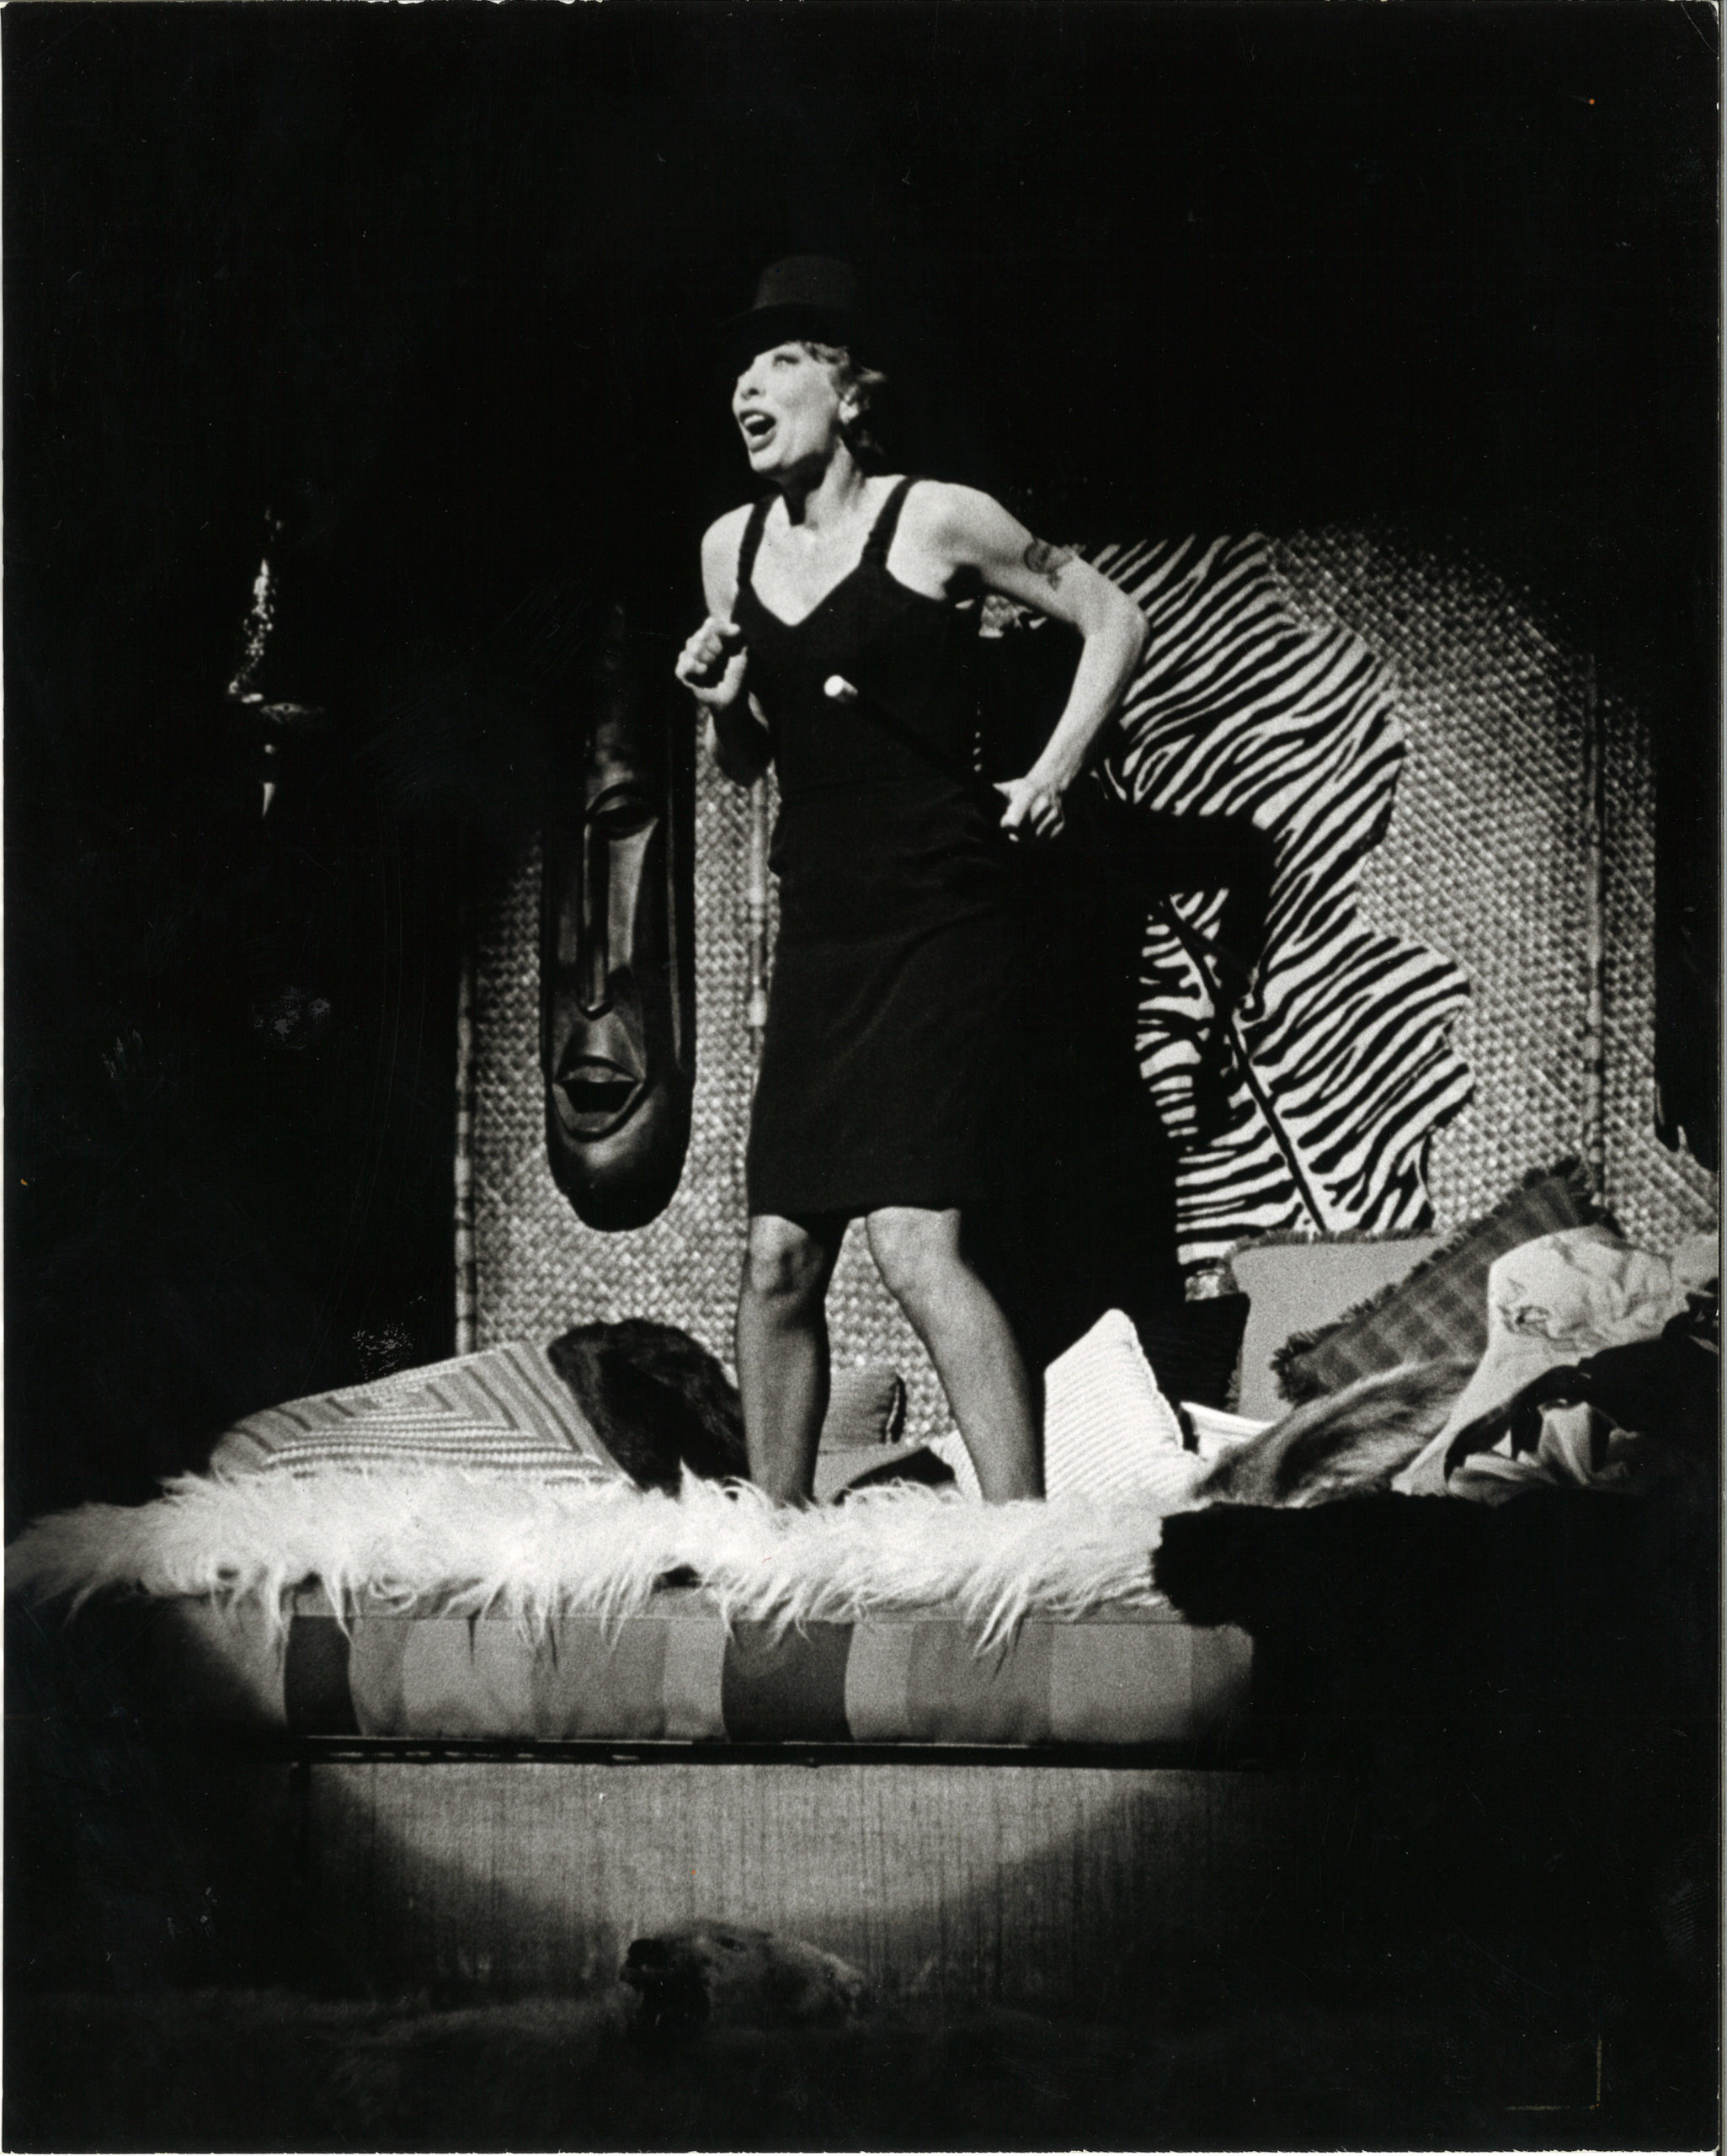 In a black and white archival image, Gwen Verdon sings in a black dress and hat while spotlit, standing atop a bed with a shag white blanket and patterned pillows.